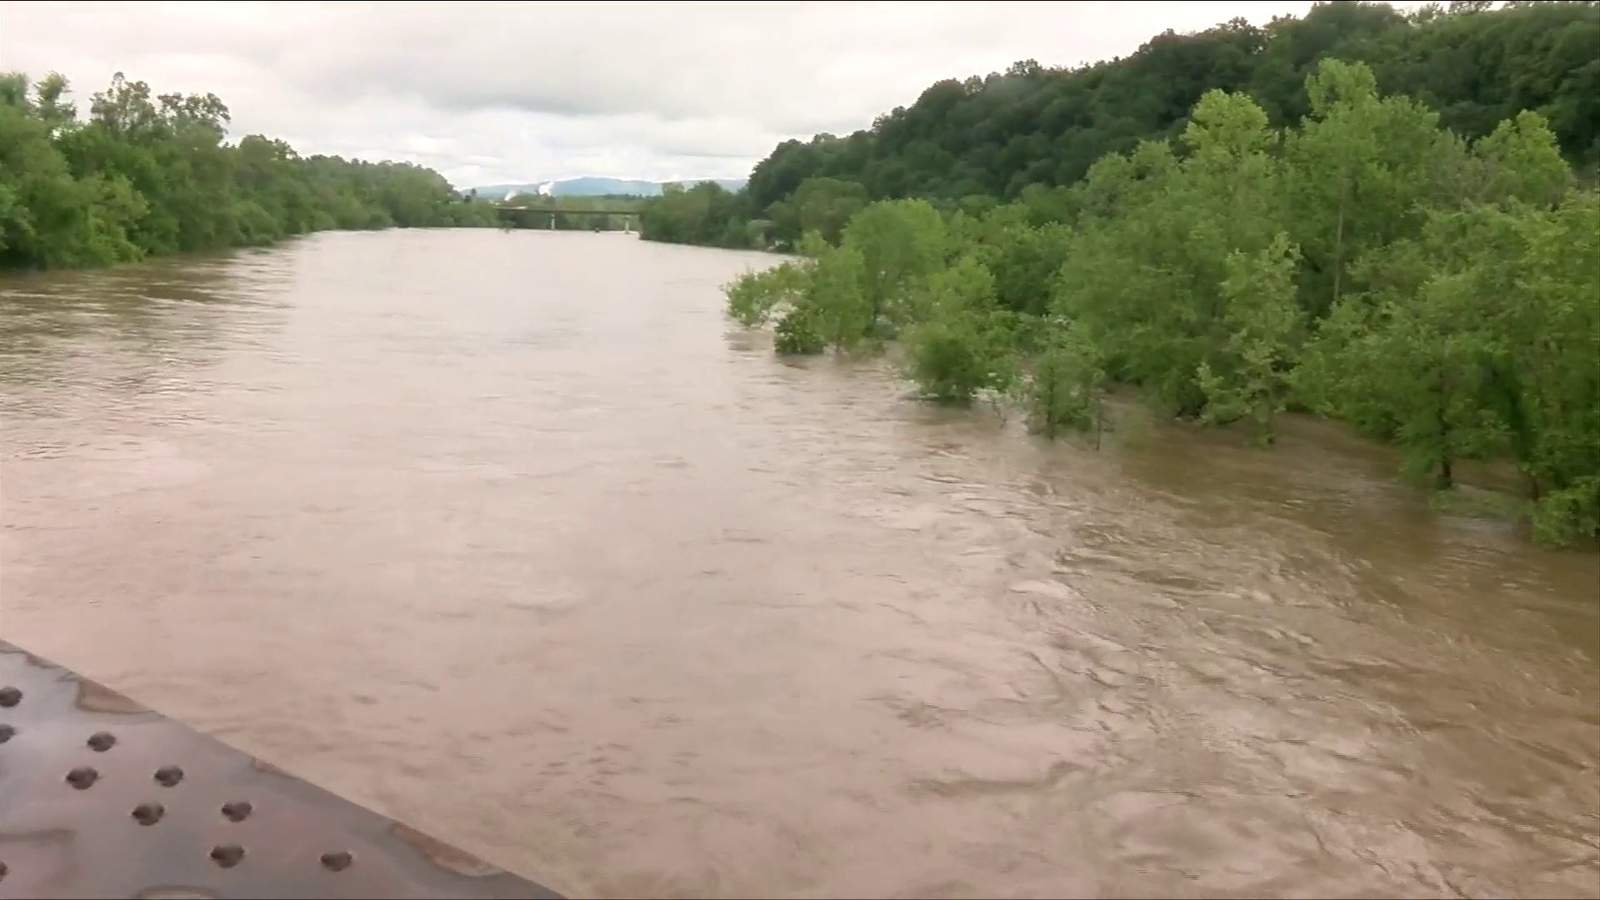 Lynchburg closes parts of Percival’s Island due to James River flooding